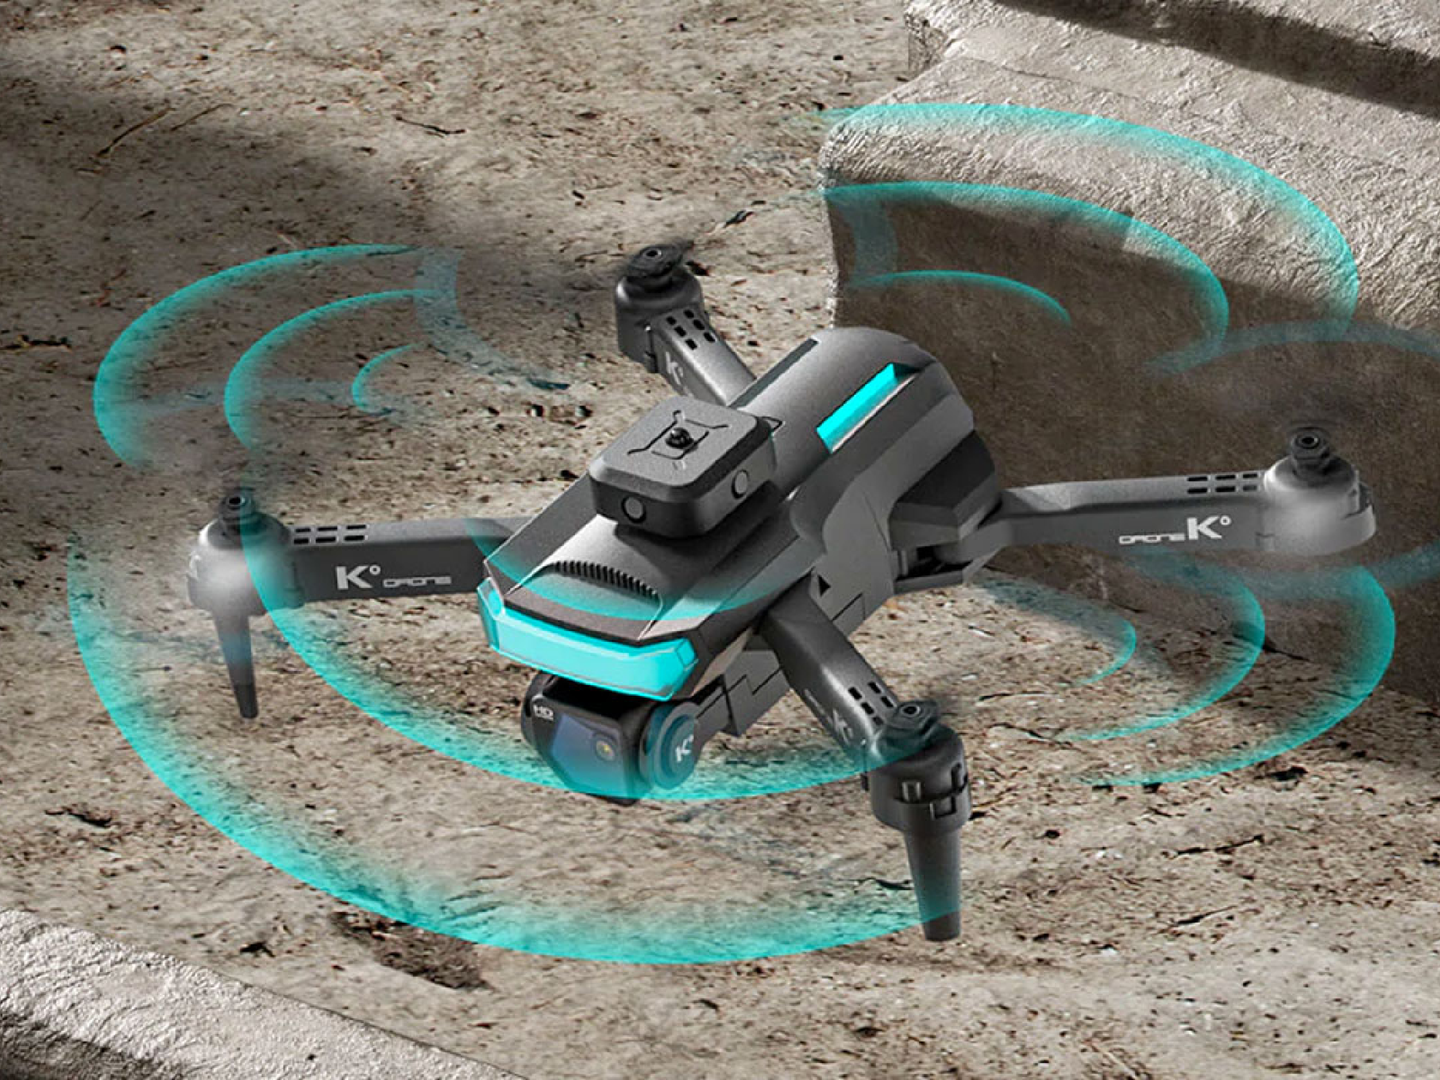 A quad-copter, dual-camera drone flying over on a rocky surface.